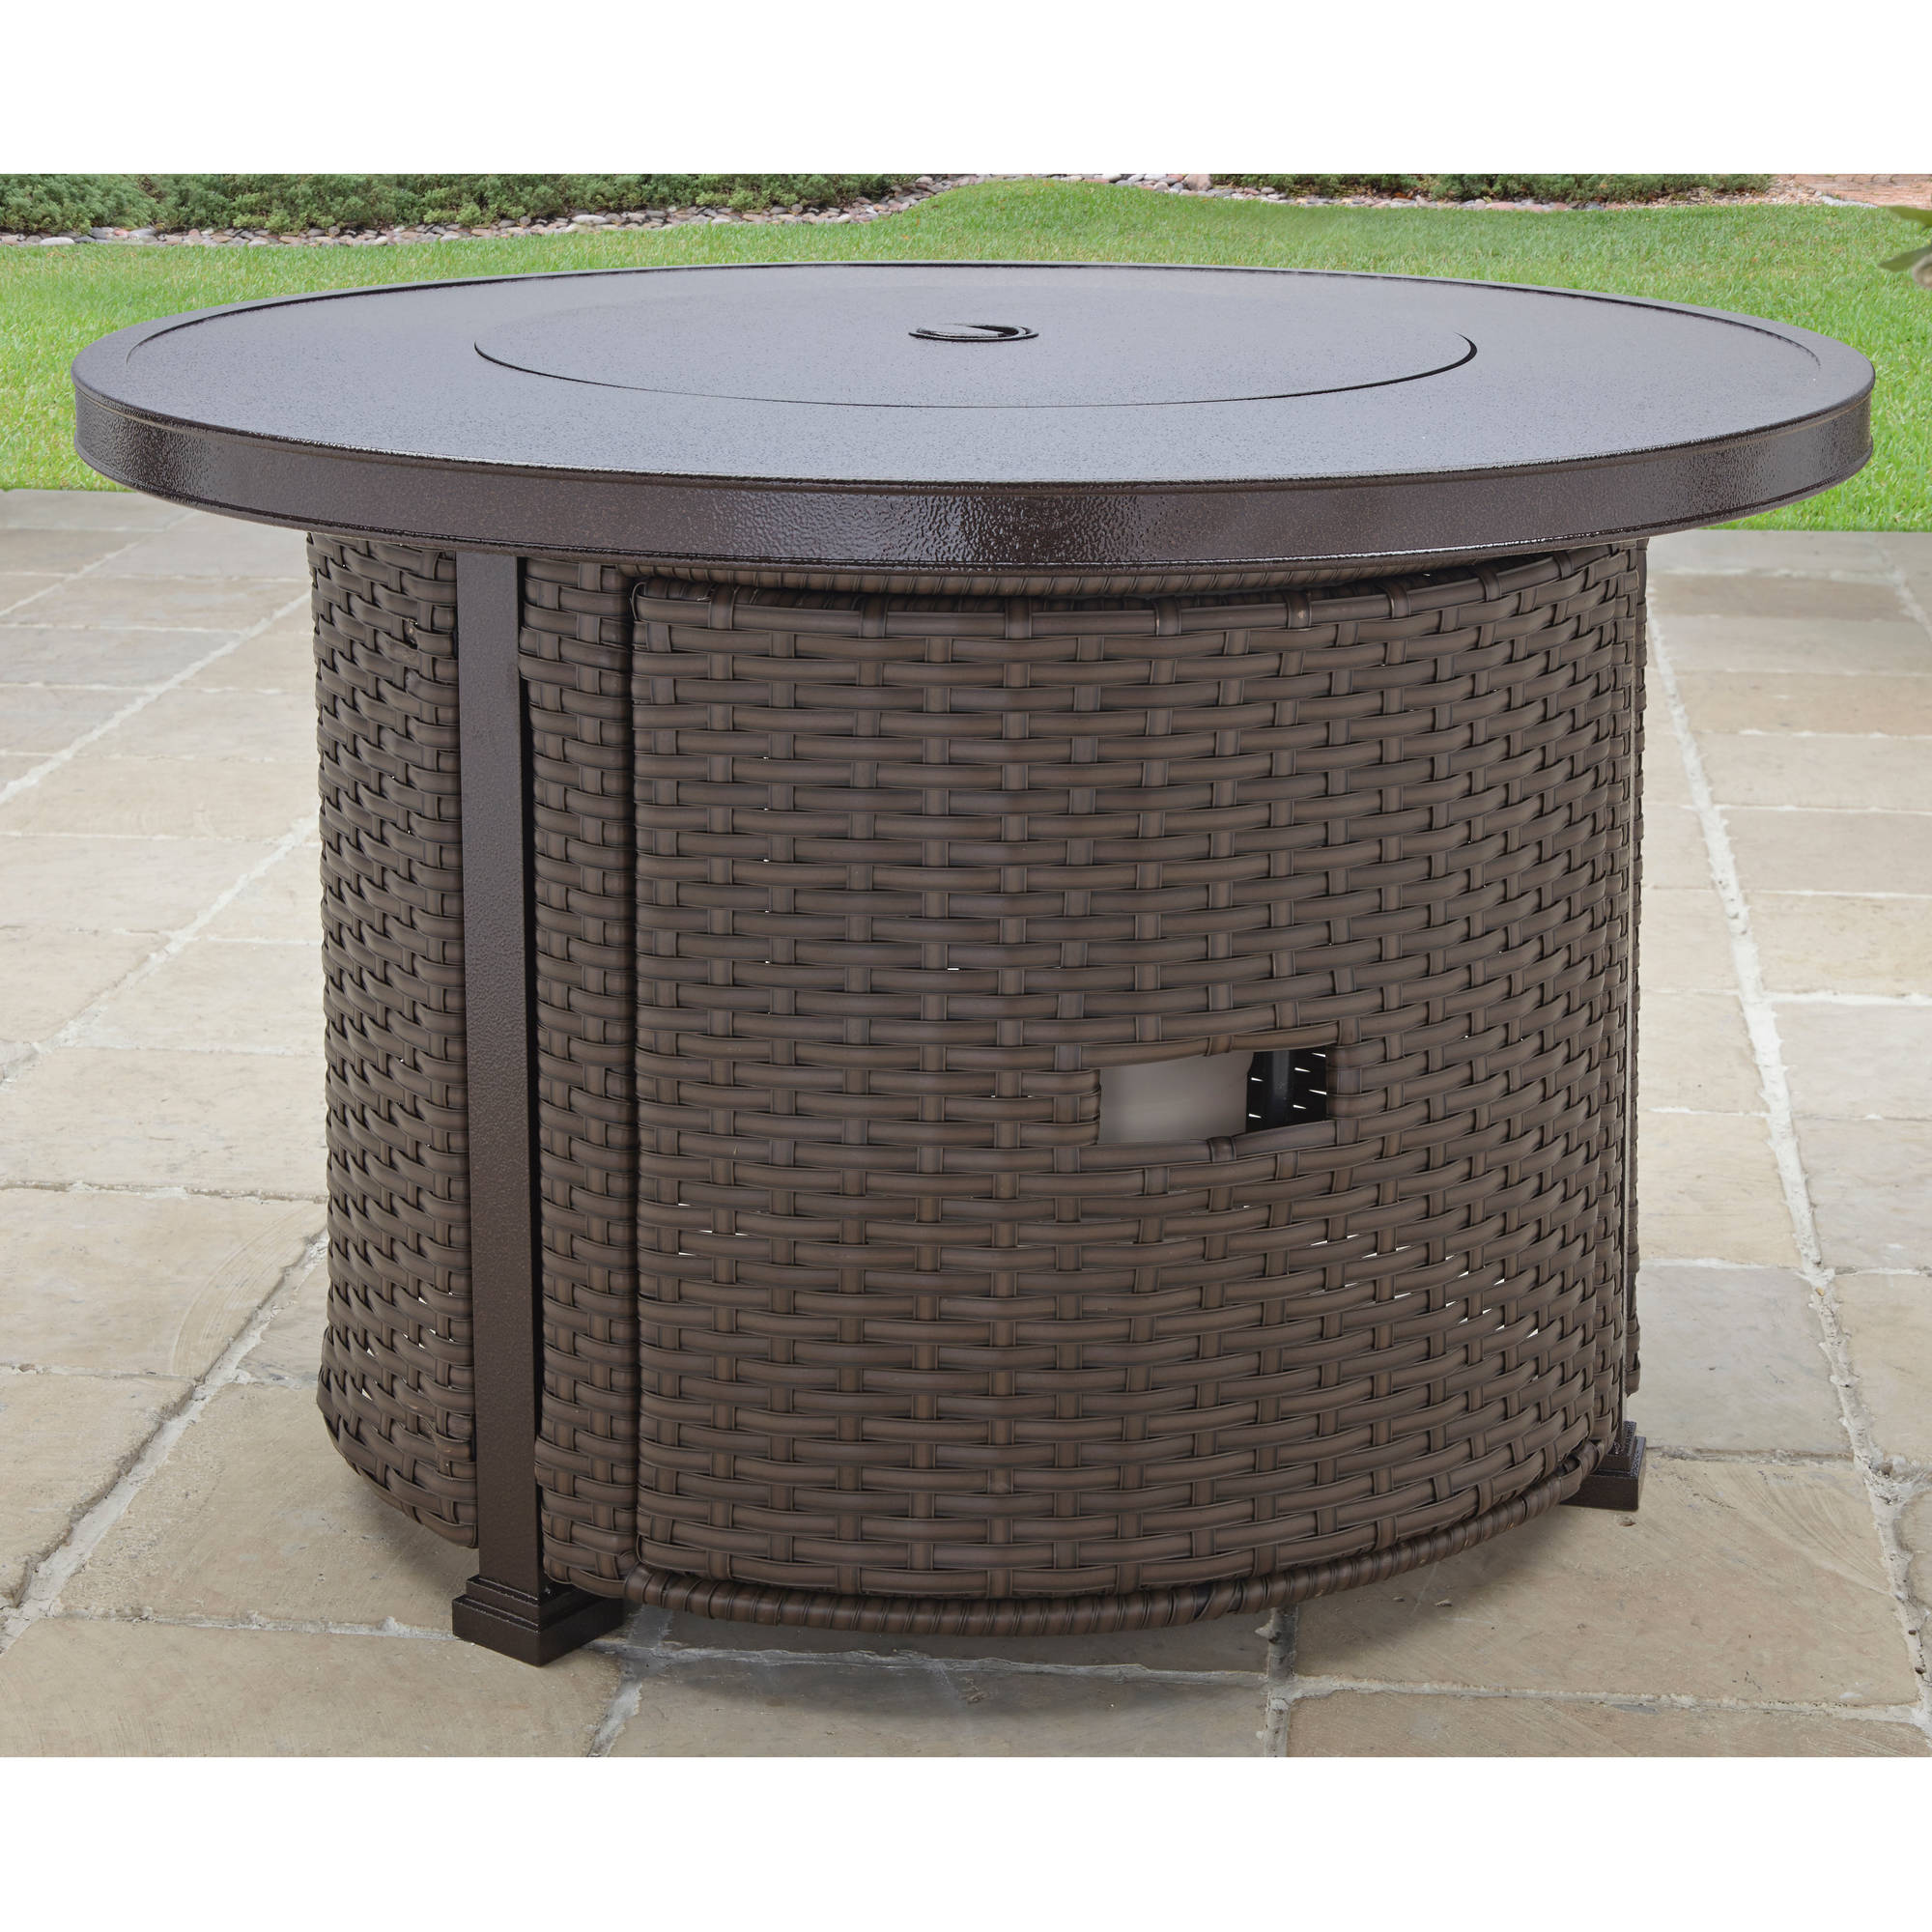 Better Homes & Gardens Colebrooke 37" Round 50,000 BTU Propane Gas Fire Pit Table with Glass Beads, Metal Lid and Protective Cover - image 4 of 14